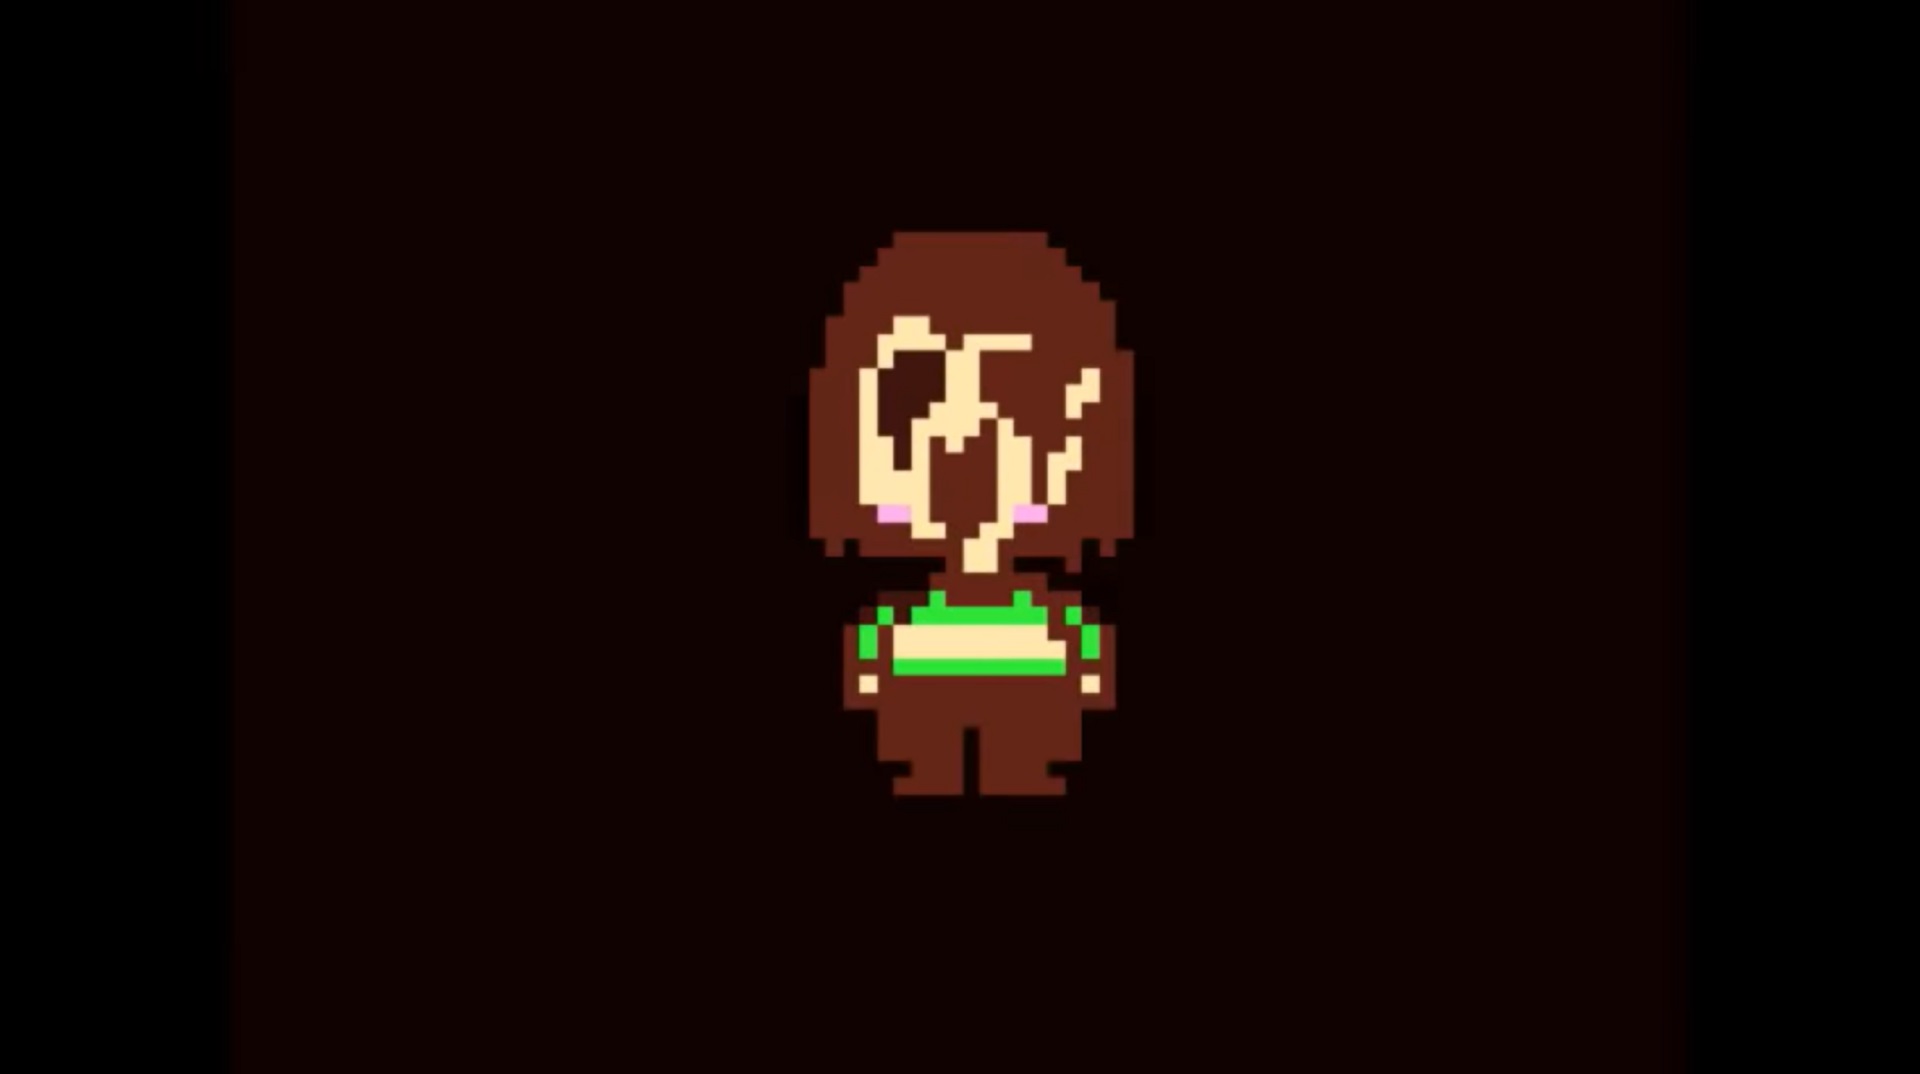 Chara Meets Other Ghosts : r/Undertale